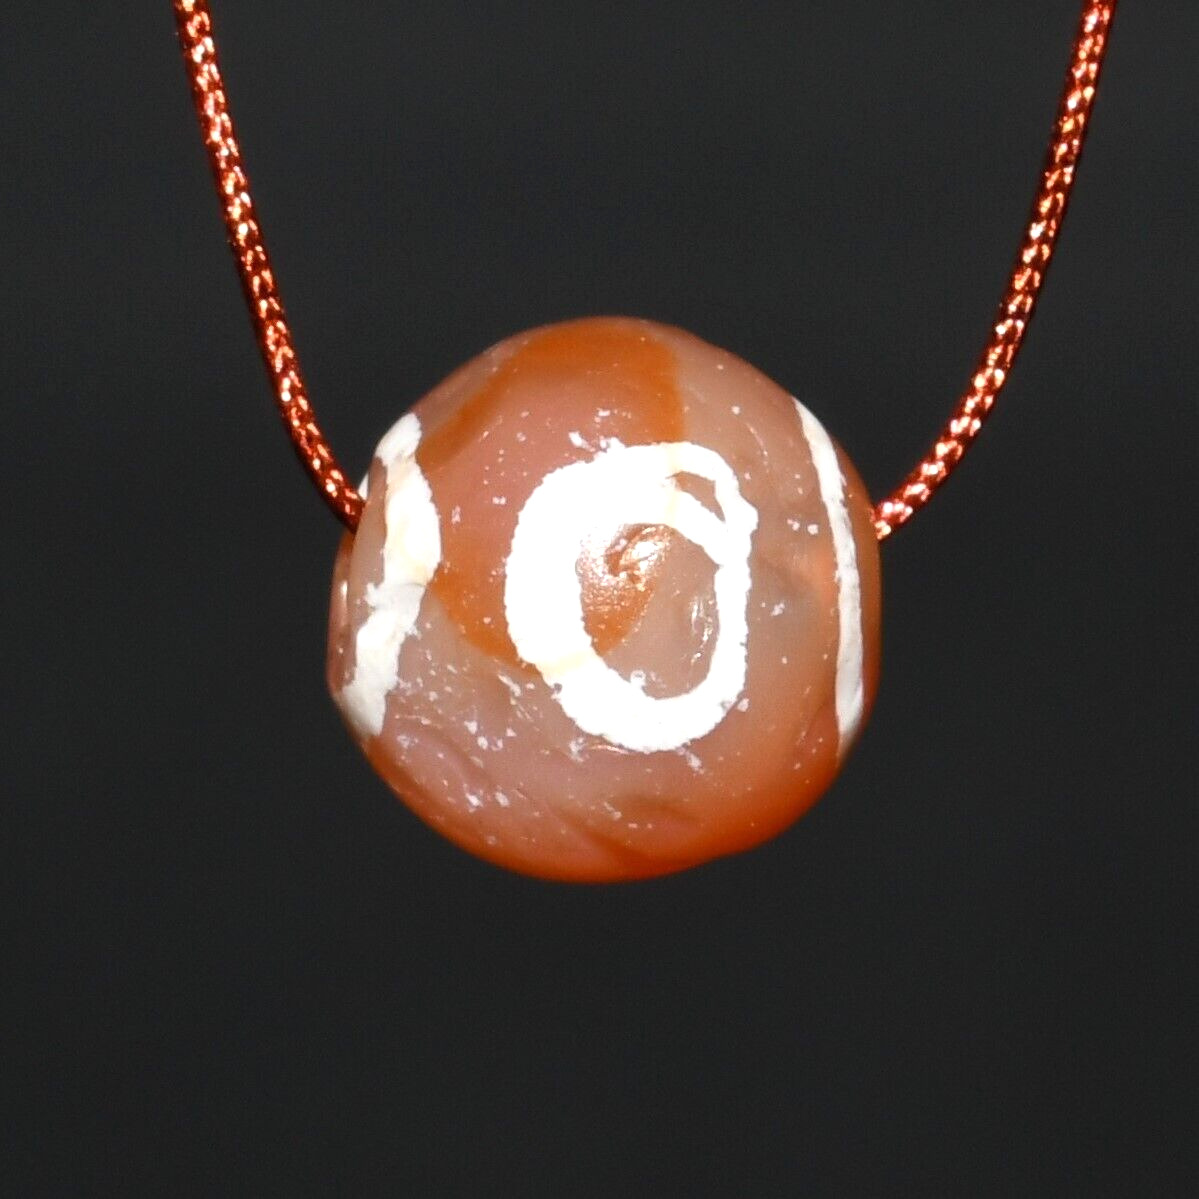 Authentic Rare Ancient Round Etched Carnelian Dzi Bead over 2000 Years Old